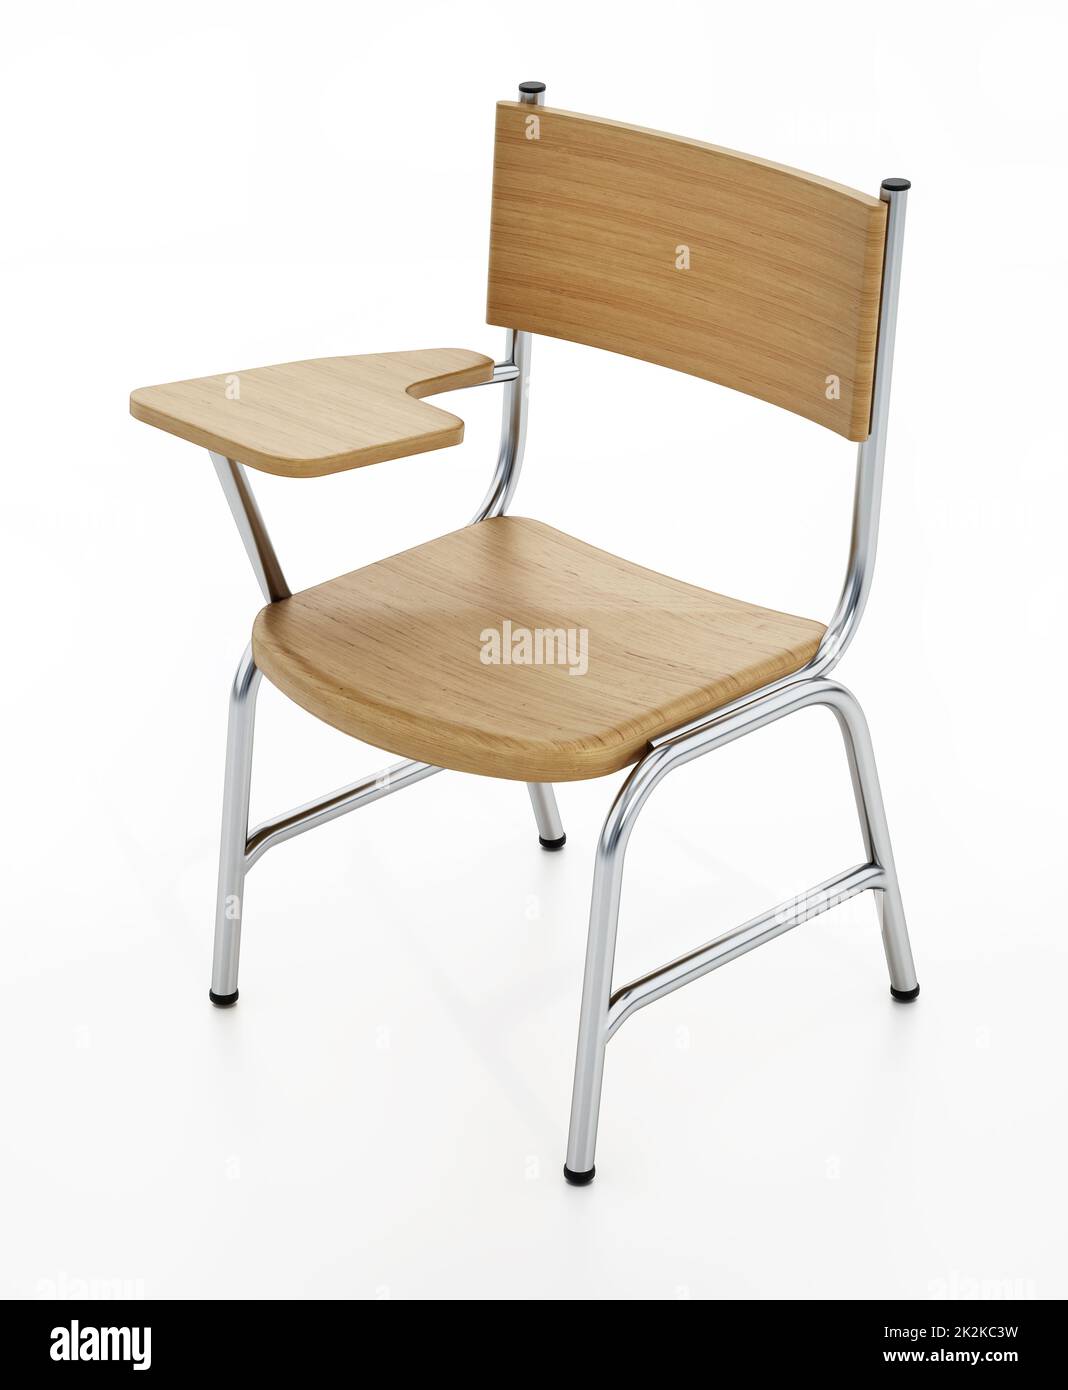 Student chair isolated on white background. 3D illustration Stock Photo